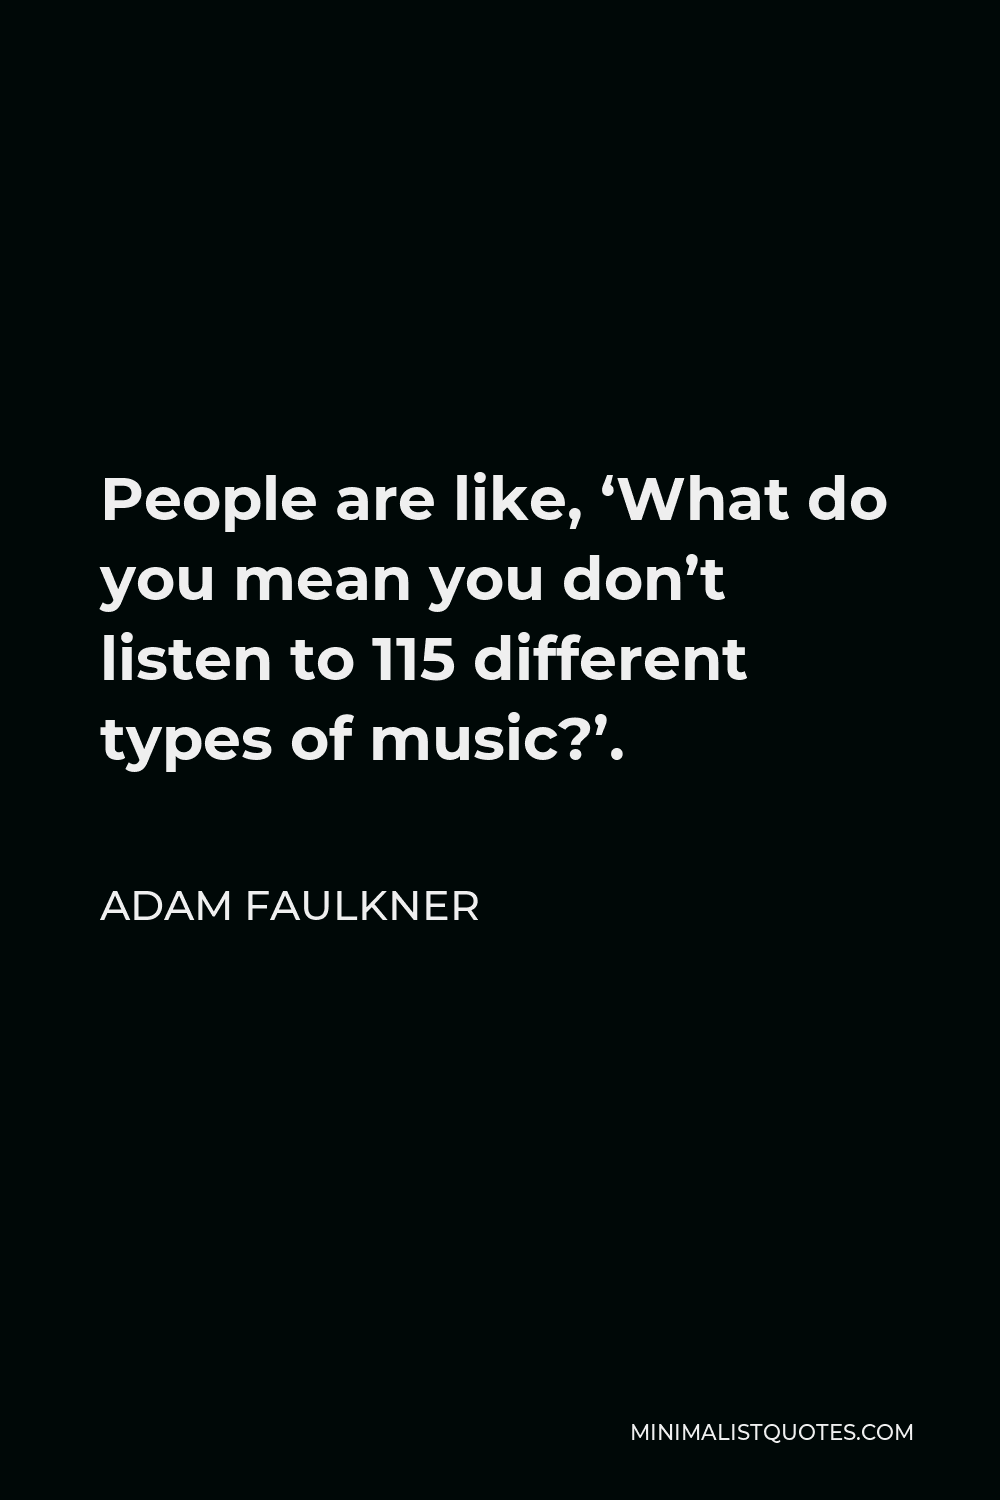 Adam Faulkner Quote People are like, 'What do you mean you don't